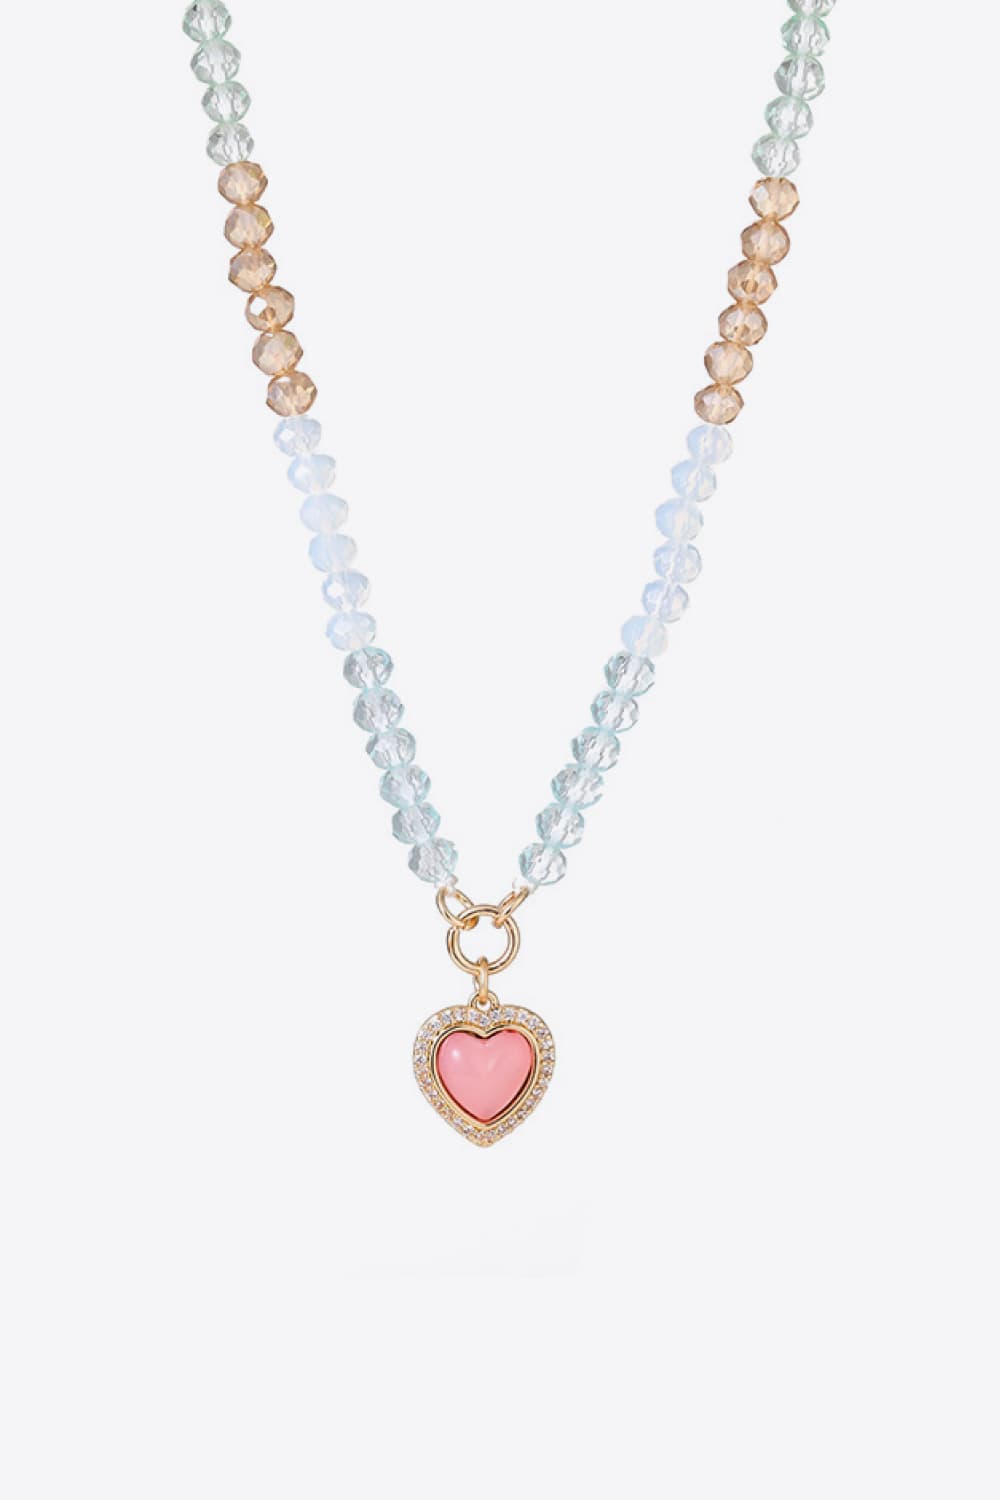 Heart Pendant Beaded Necklace - Fall in love with the stunning masterpiece that ignites a flame of passion within you - Wear it all day and cherish forever! - Guy Christopher